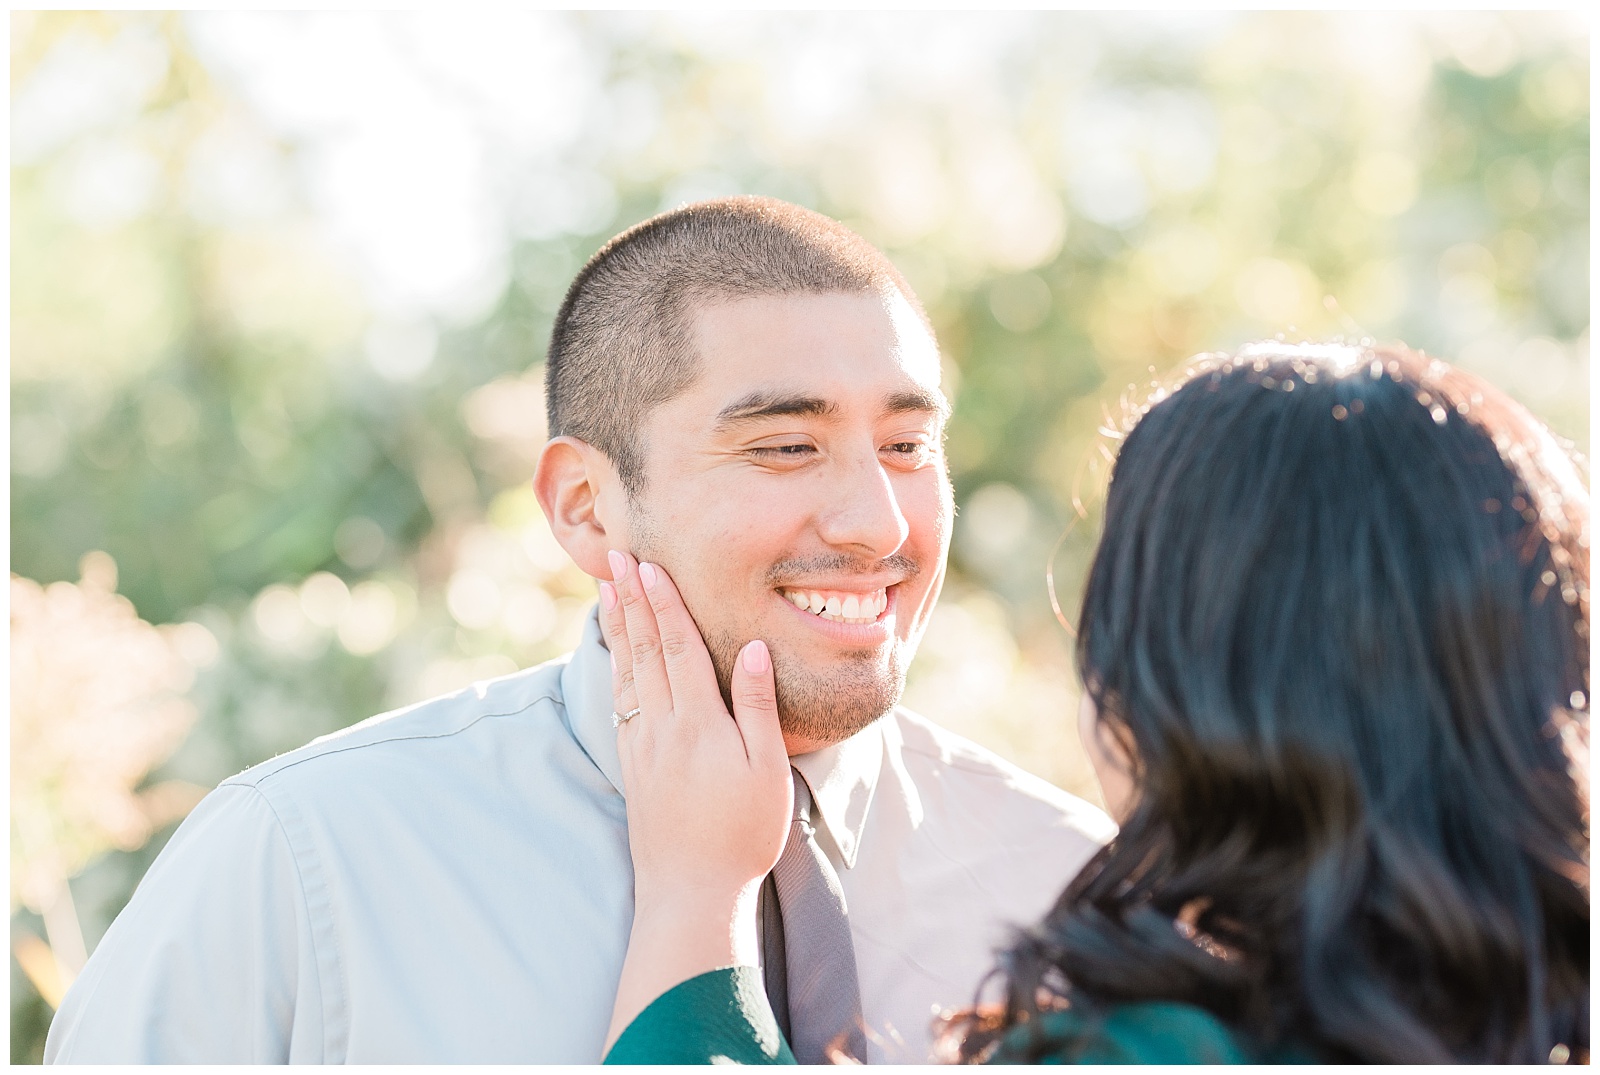 Engaged,Engagement Session,Field,Garden,Jersey City,Liberty State Park,NJ,Nature,Wedding Photographer,